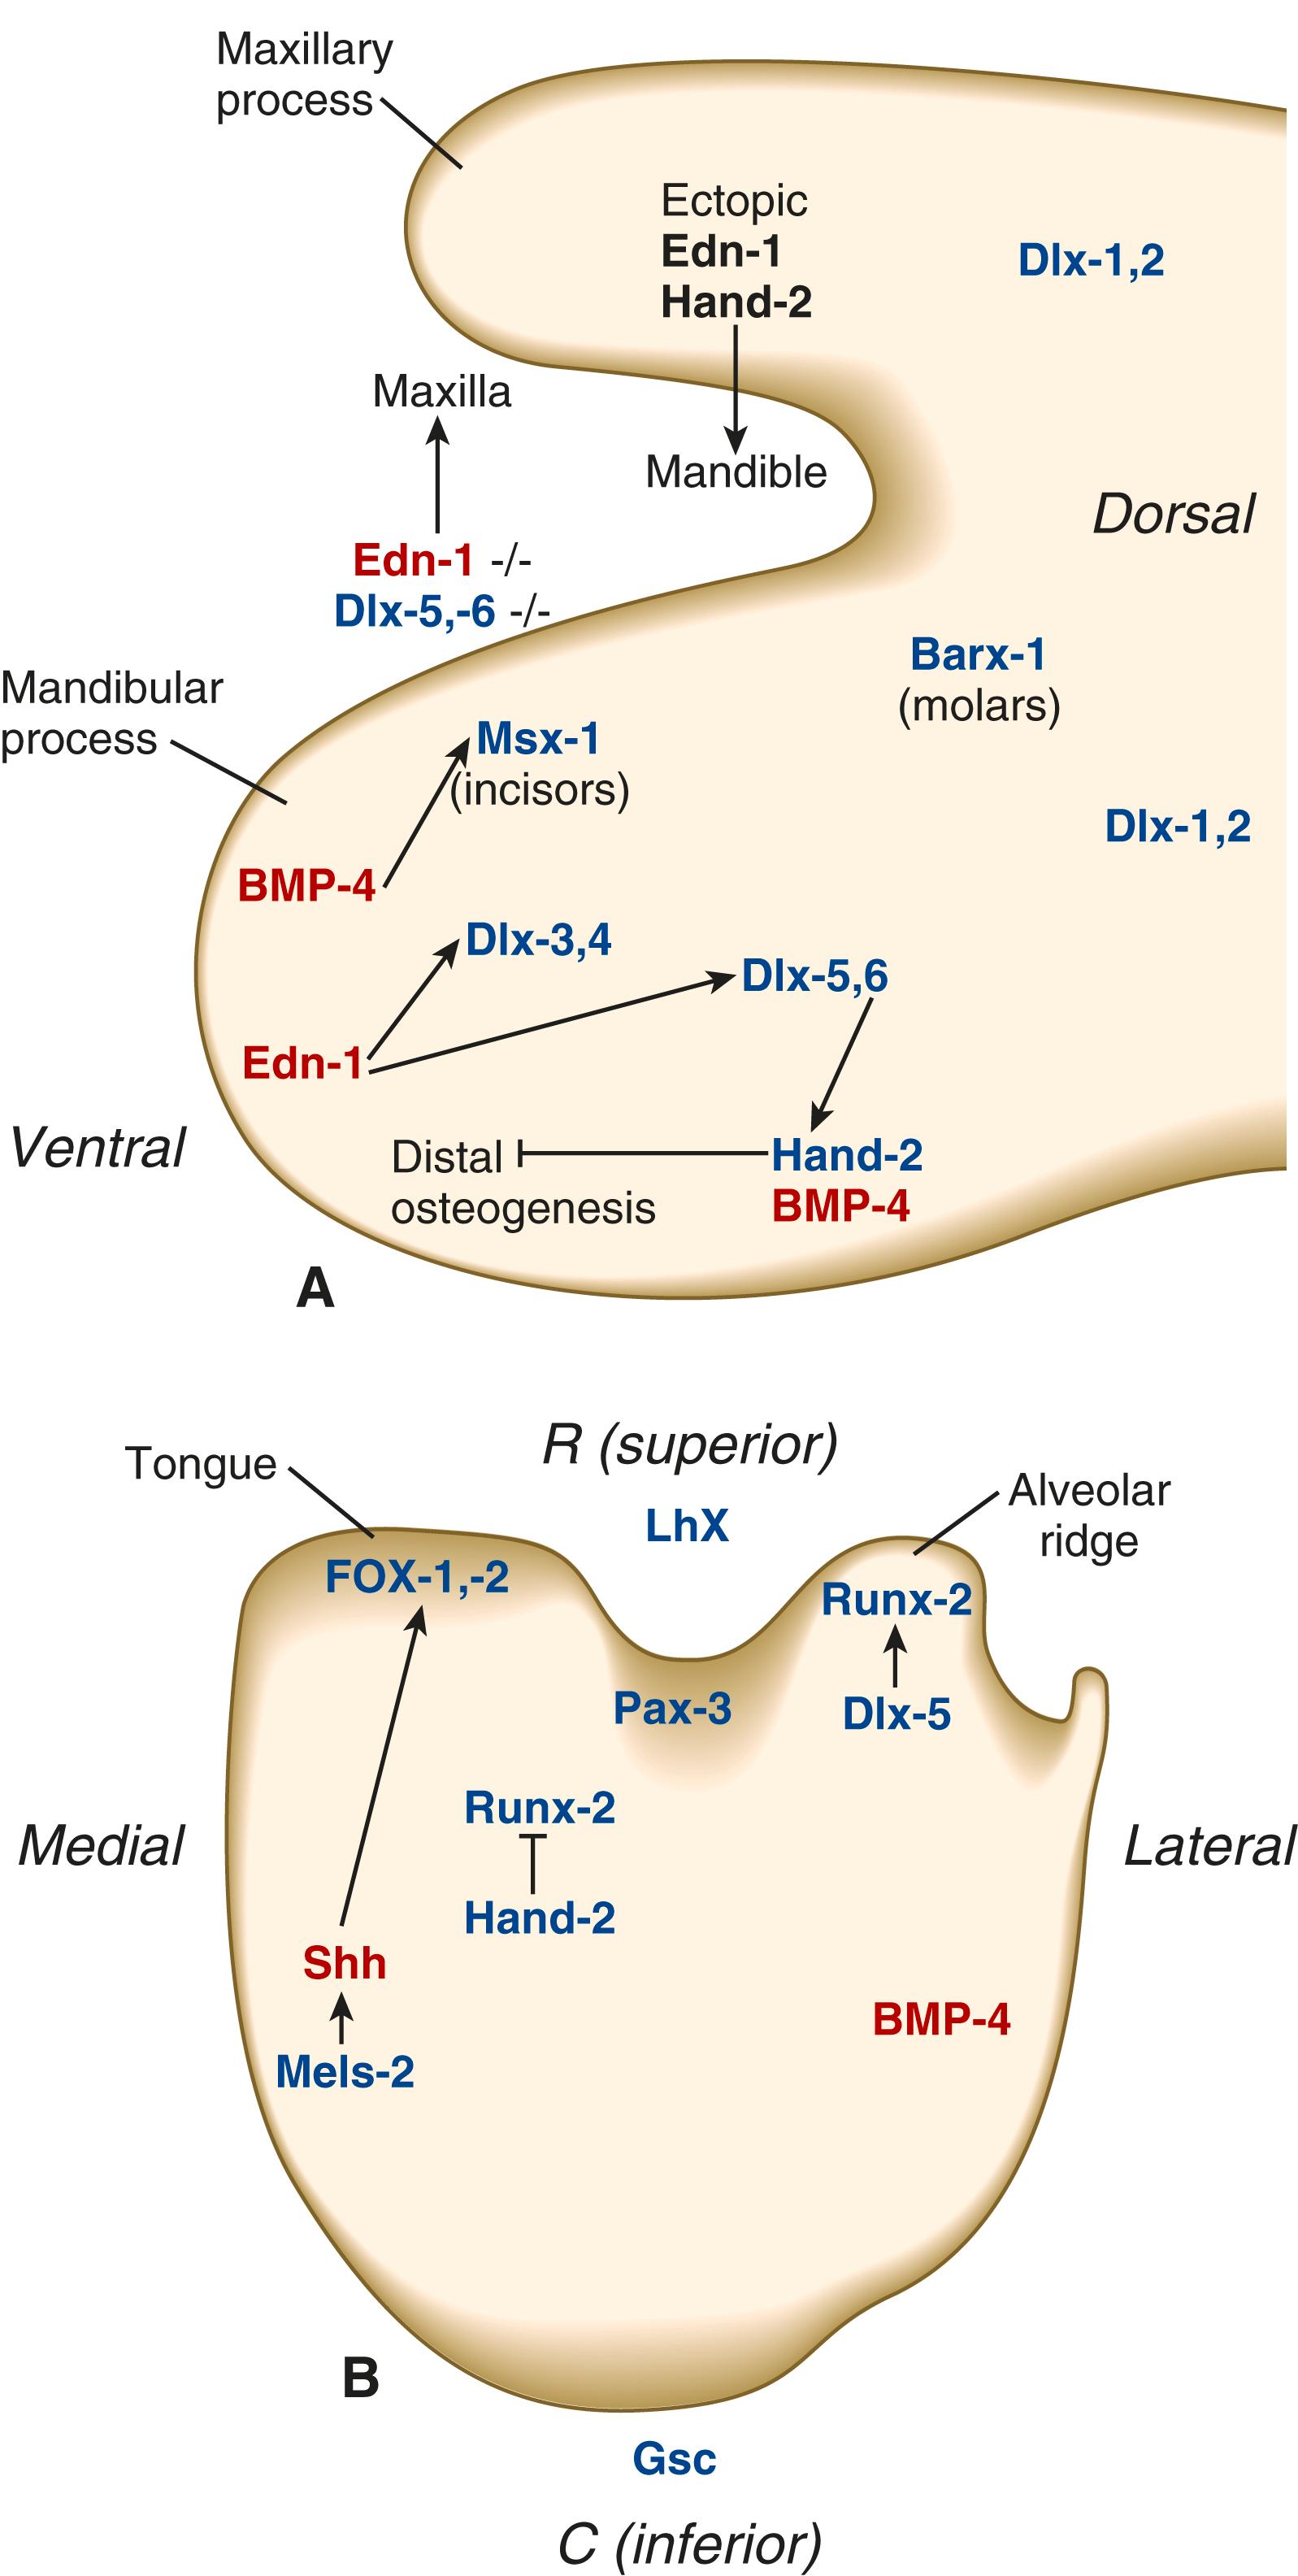 Fig. 14.6, (A) Molecular controls in development of the first pharyngeal arch. Note the distribution of forms of the Dlx transcription factor along the dorsoventral axis. Inactivation of endothelin-1 or Dlx-5,-6 converts the mandible into maxilla, whereas ectopic expression of endothelin-1 or Hand-2 in the maxillary primordium causes it to form mandibular structures. (B) Cross-section of the mandibular process, showing molecular controls that guide development of the tongue and alveolar ridge. Lhx and Goosecoid define and control development along the superior-inferior axis. BMP, Bone morphogenetic protein; C , caudal; Edn-1, endothelin-1; Gsc, goosecoid; L, lateral; M, medial; R , rostral; shh, sonic hedgehog.